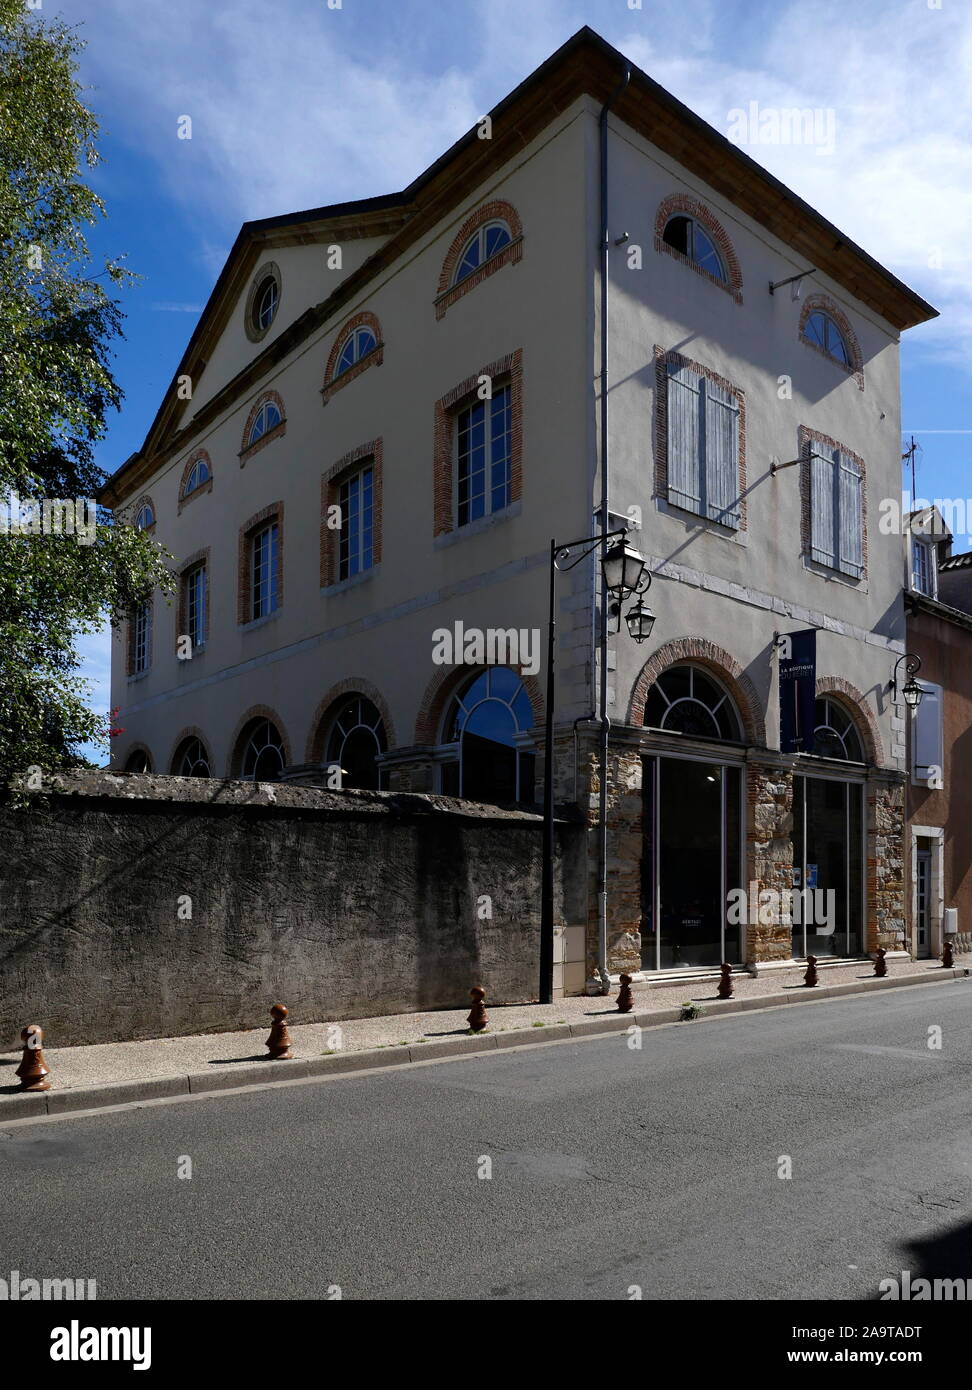 AJAXNETPHOTO. 2019. NAY, FRANCE. - FRENCH BERET - THE MUSÉE DU BERET  ESTABLISHED BY THE BLANCQ-OBILET FABRICATOR OF THE FAMOUS BASQUE, OR BEARN,  BERET, IN THE SMALL TOWN OF NAY IN THE